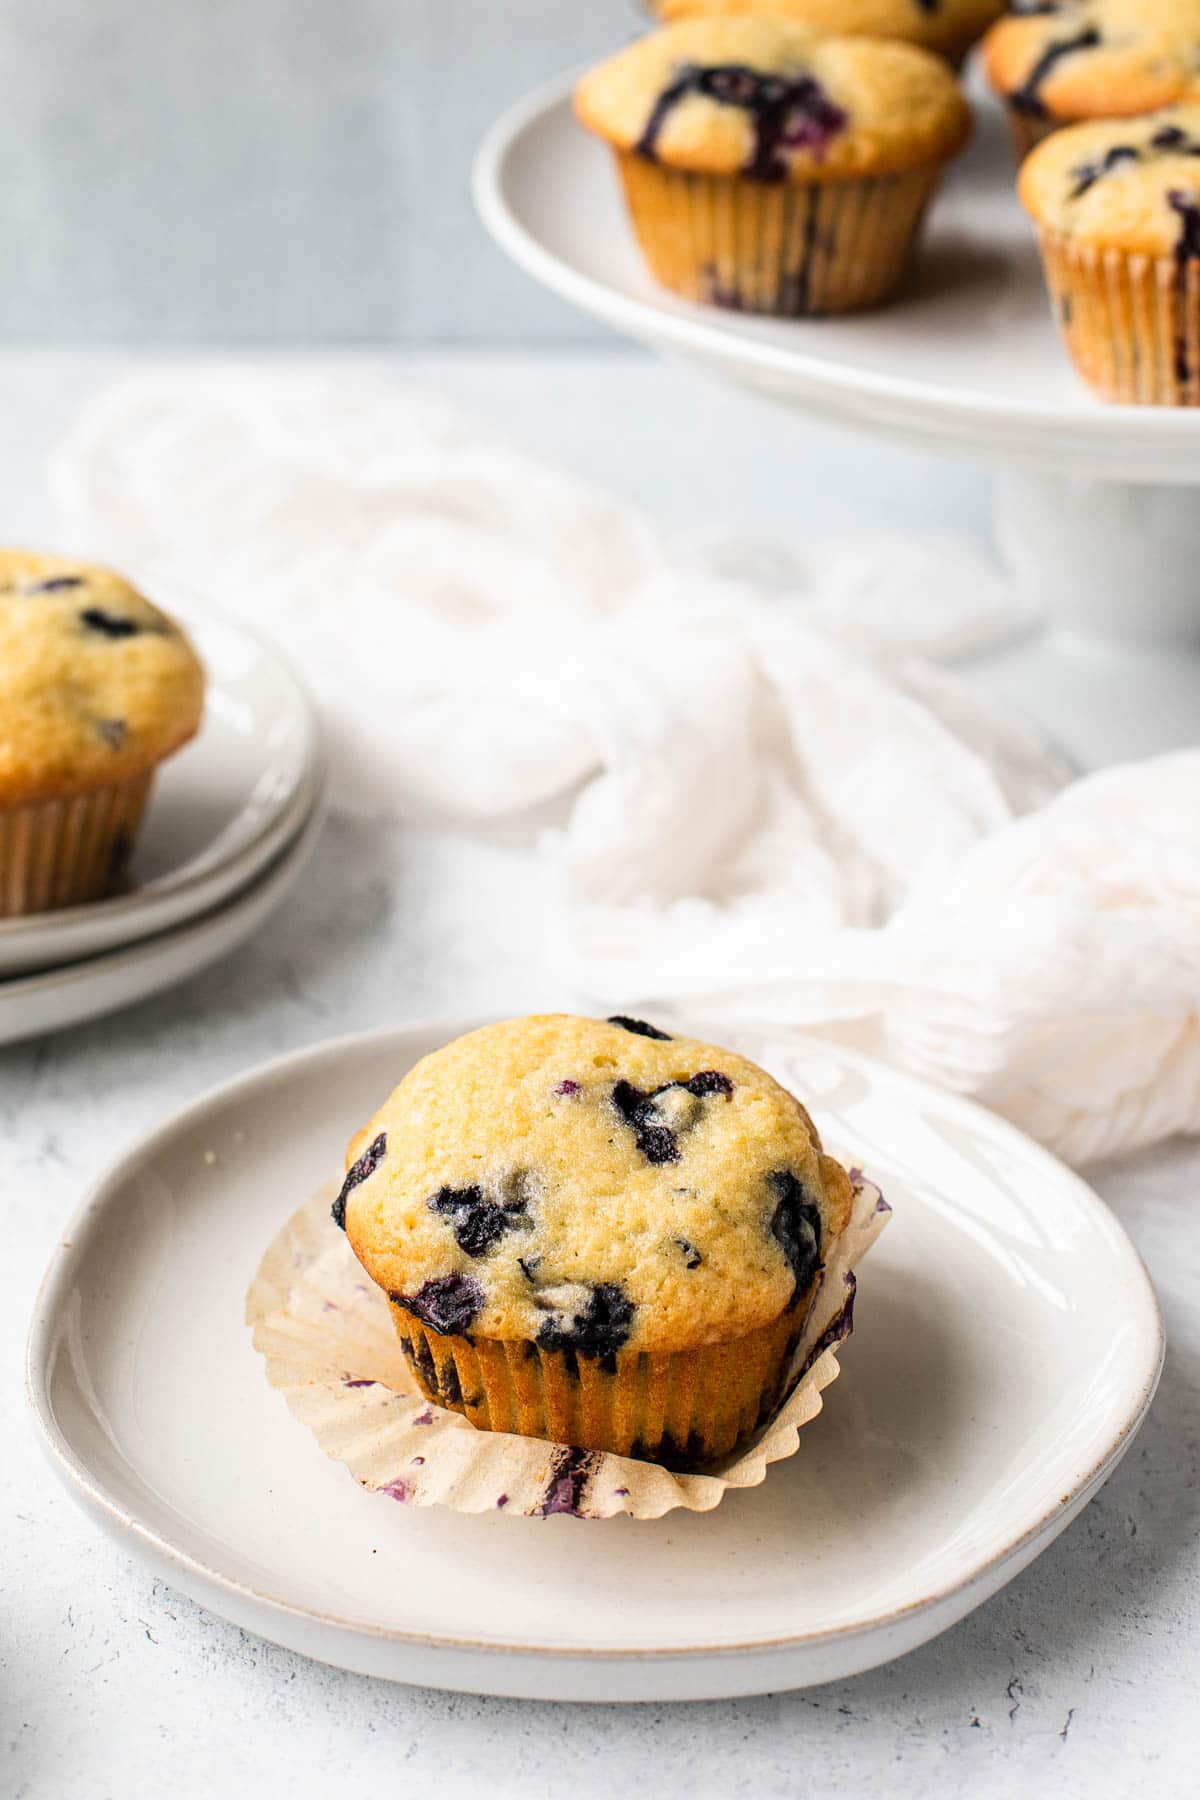 a blueberry muffin on a white plate with more muffins on a cake stand in the background